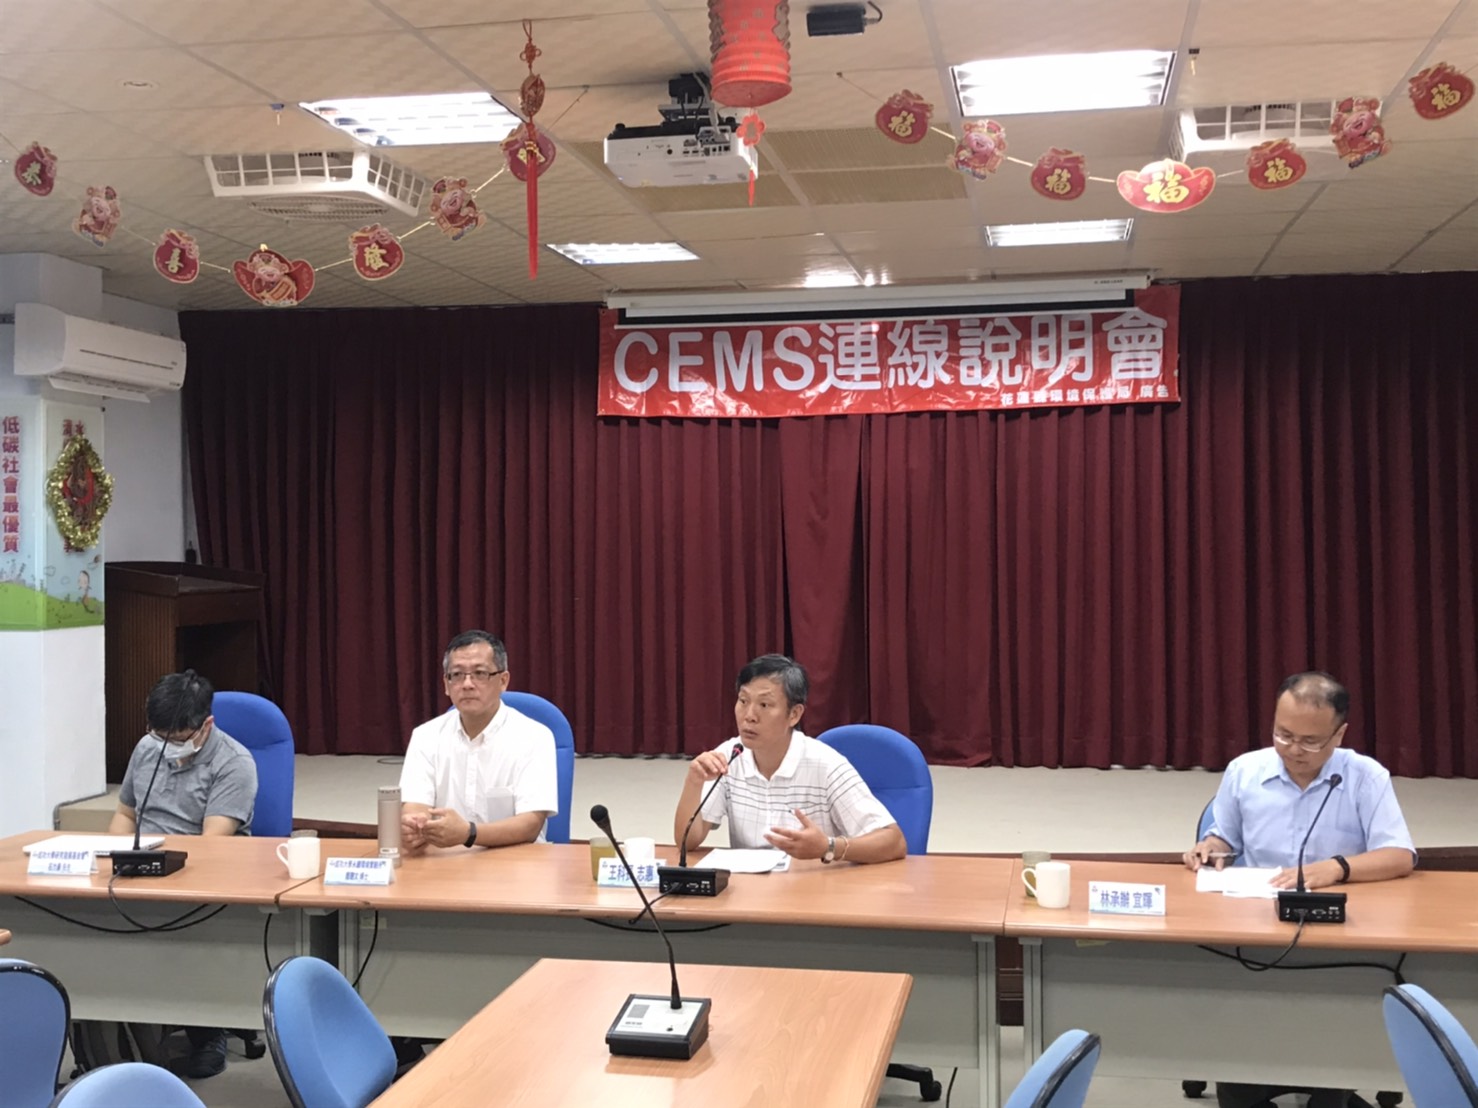 Environmental Protection Bureau held a web briefing of the Continuous Emission Monitoring Systems (CEMS)